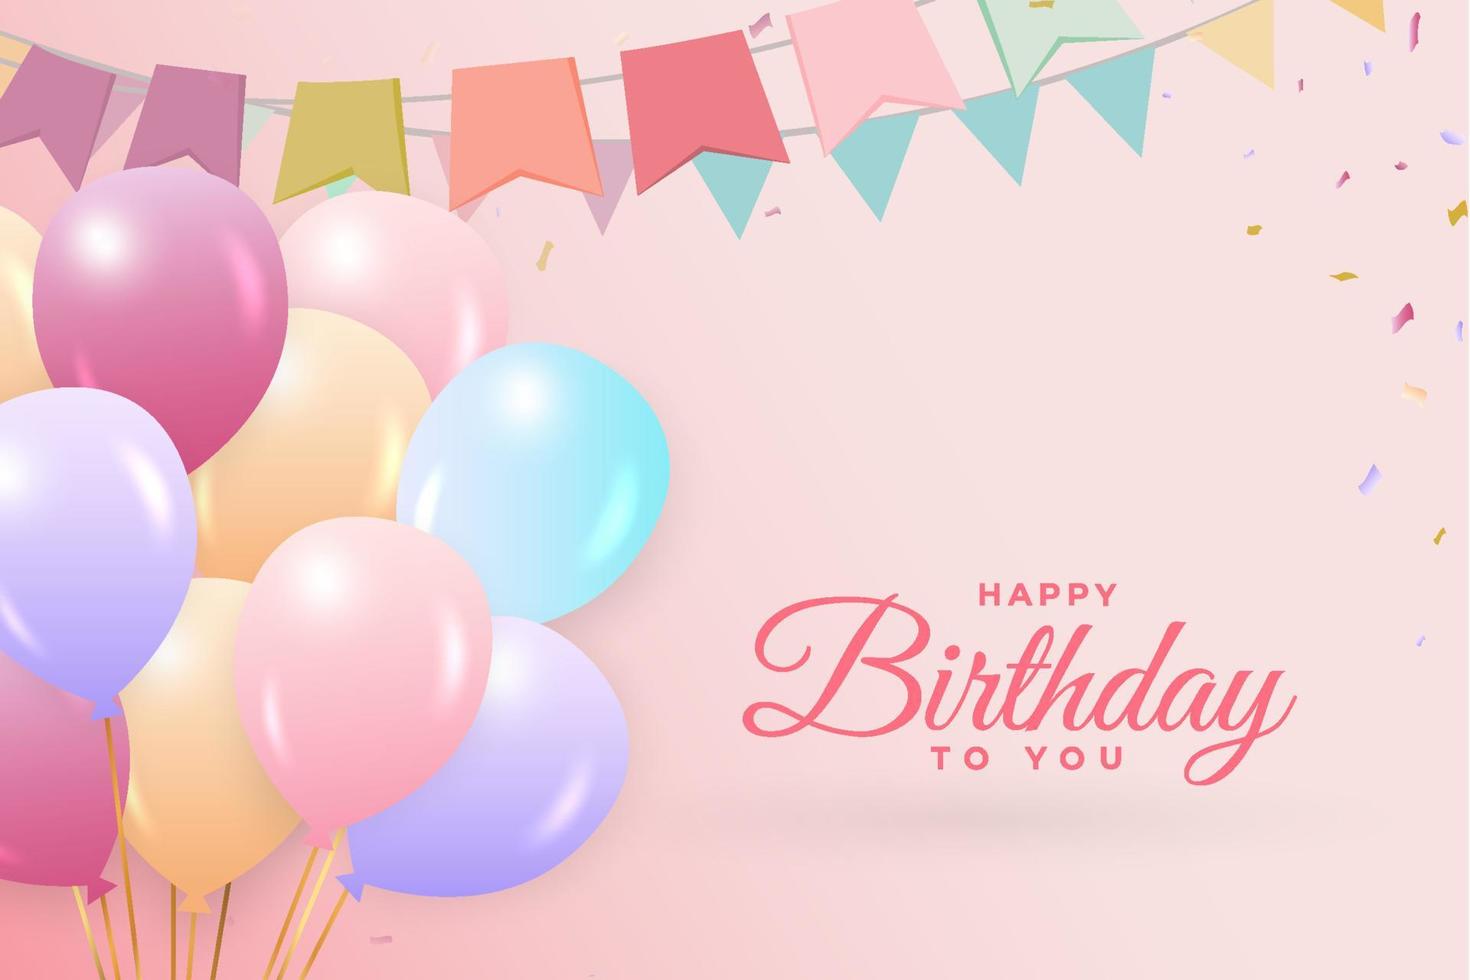 Flat balloons for birthday background. Happy birthday social media post with a lot of balloons and confetti. Happy birthday wish with pink calligraphy. Colorful confetti background, party elements. vector